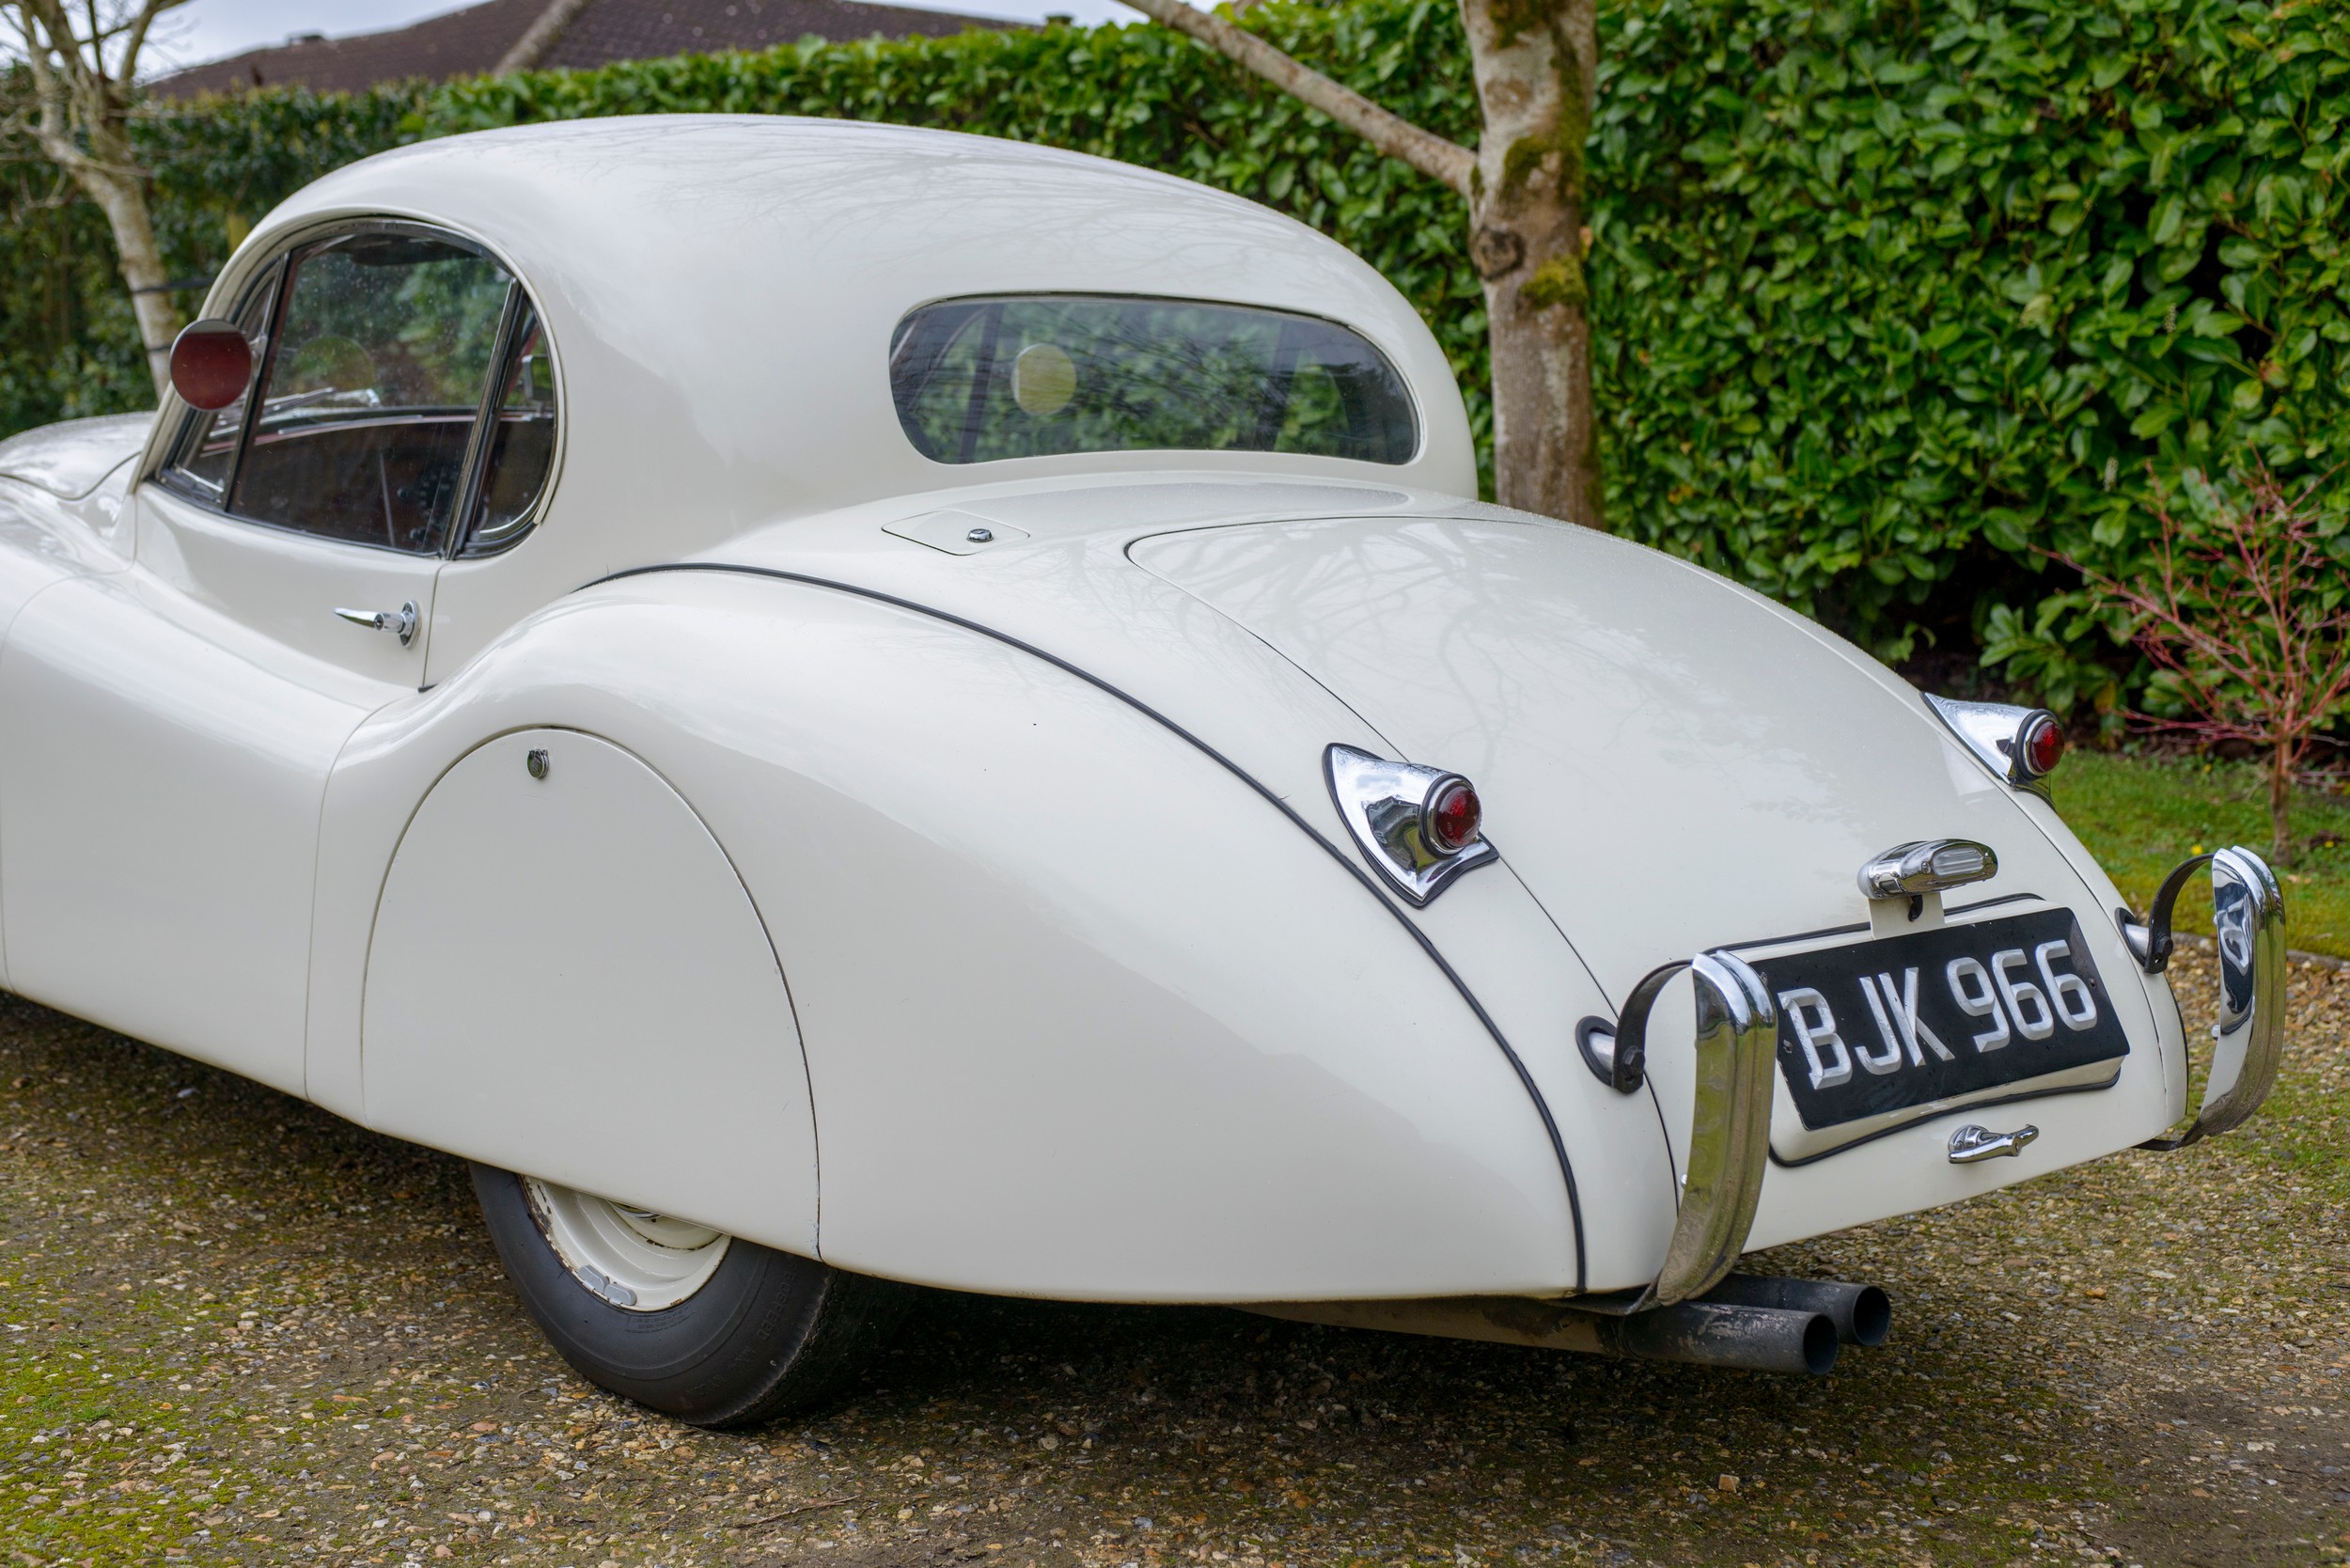 1954 JAGUAR XK120 FIXED HEAD COUPE Registration Number: BJK 966 Chassis Number: 669158 Recorded - Image 9 of 61